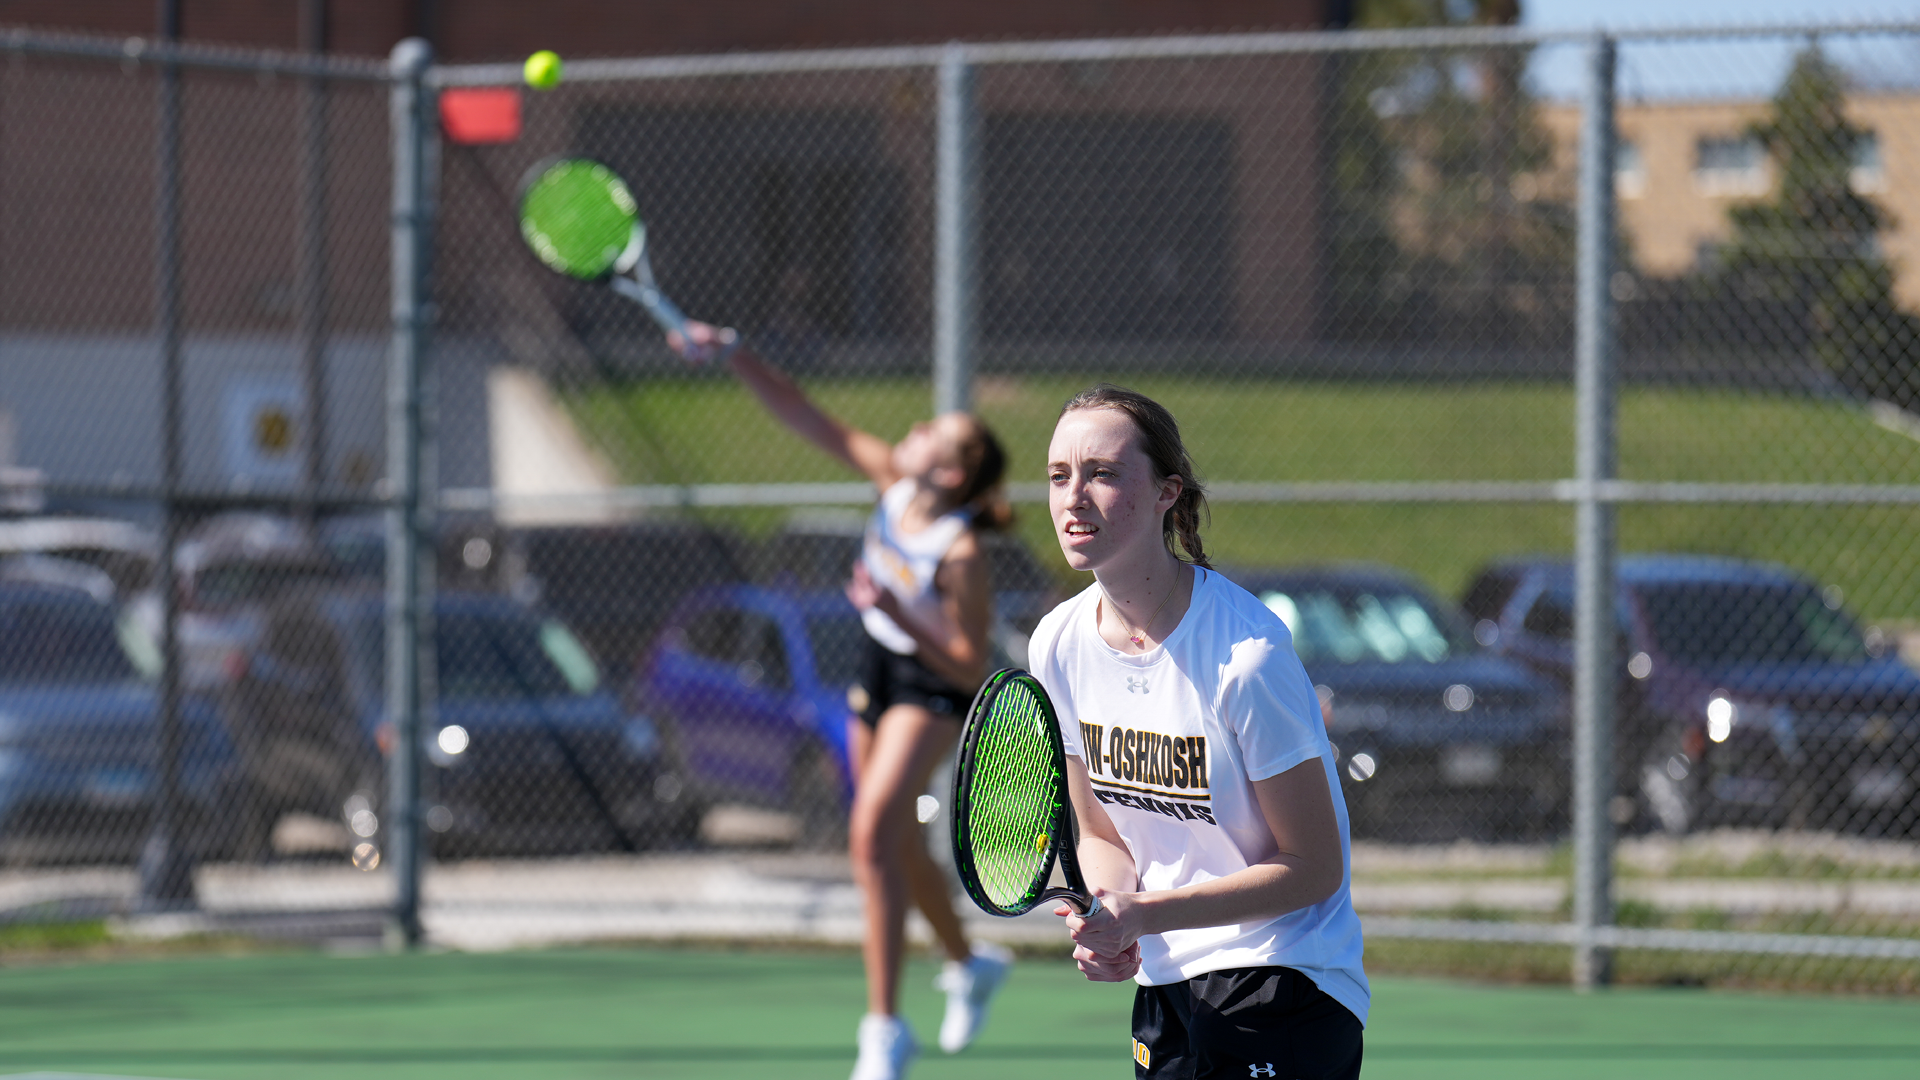 Olivia Pethan (front) and No. 1 doubles partner Alysa Pattee won in an 8-3 decision on Saturday. Photo Credit: Terri Cole, UW-Oshkosh Sports Information